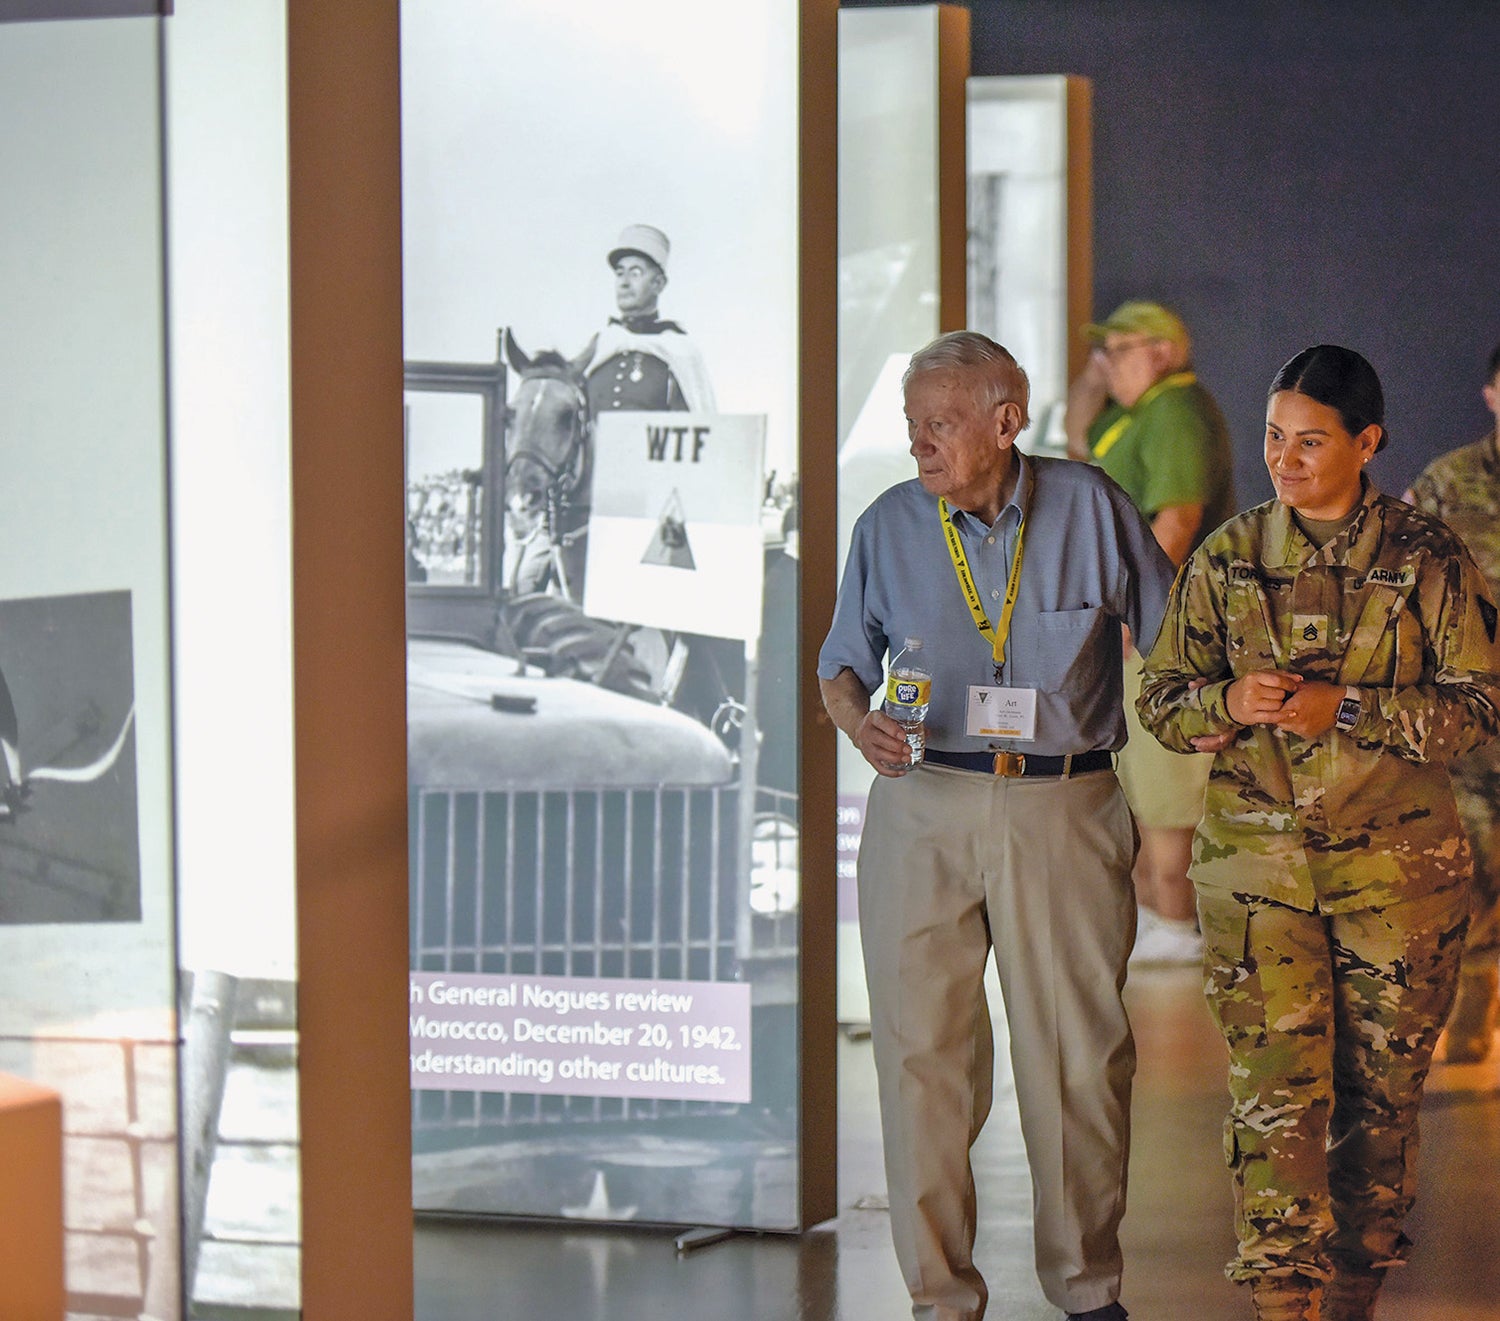 Staff Sgt. Alice Torres, right, escorts former Pvt. Arthur Jacobson, another 83rd veteran, during a tour of the General George Patton Museum, Fort Knox. (Credit: U.S. Army/Charles Leffler)